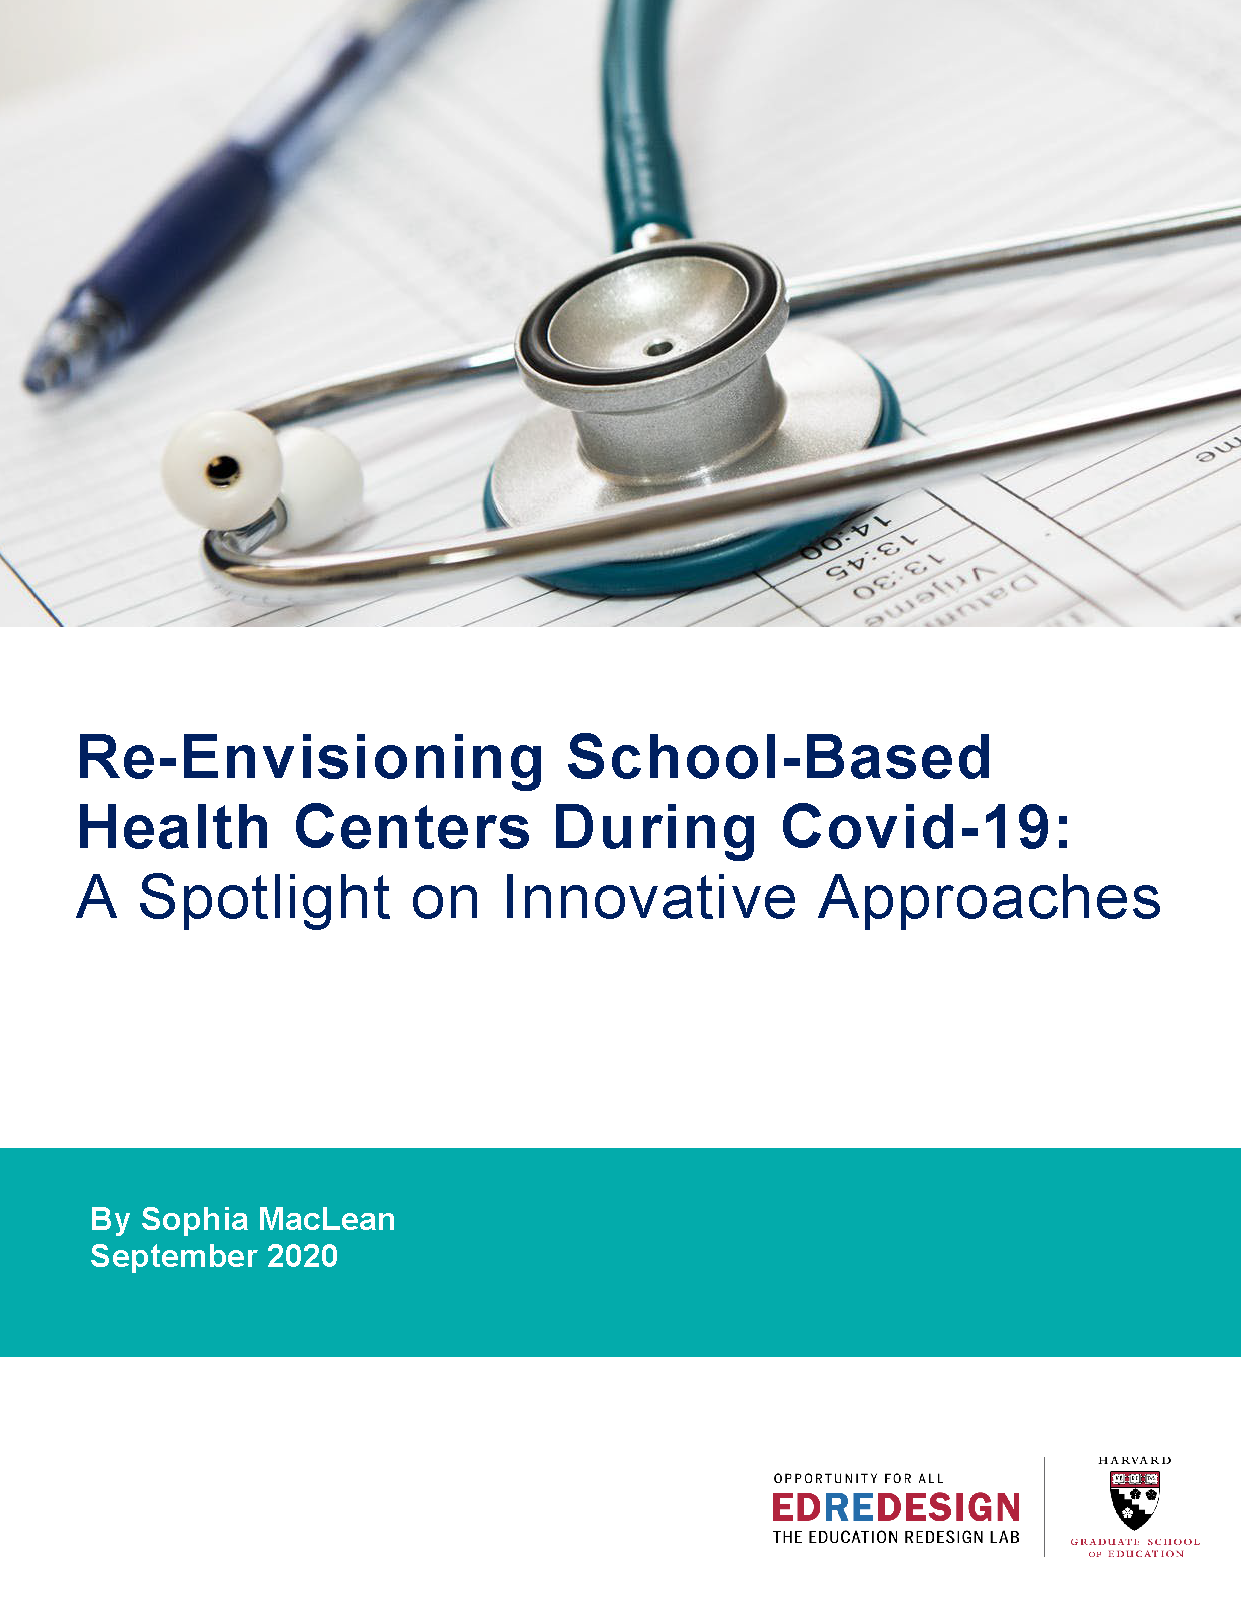 Re-Envisioning School-Based Health Centers During Covid-19:  A Spotlight on Innovative Approaches Guide